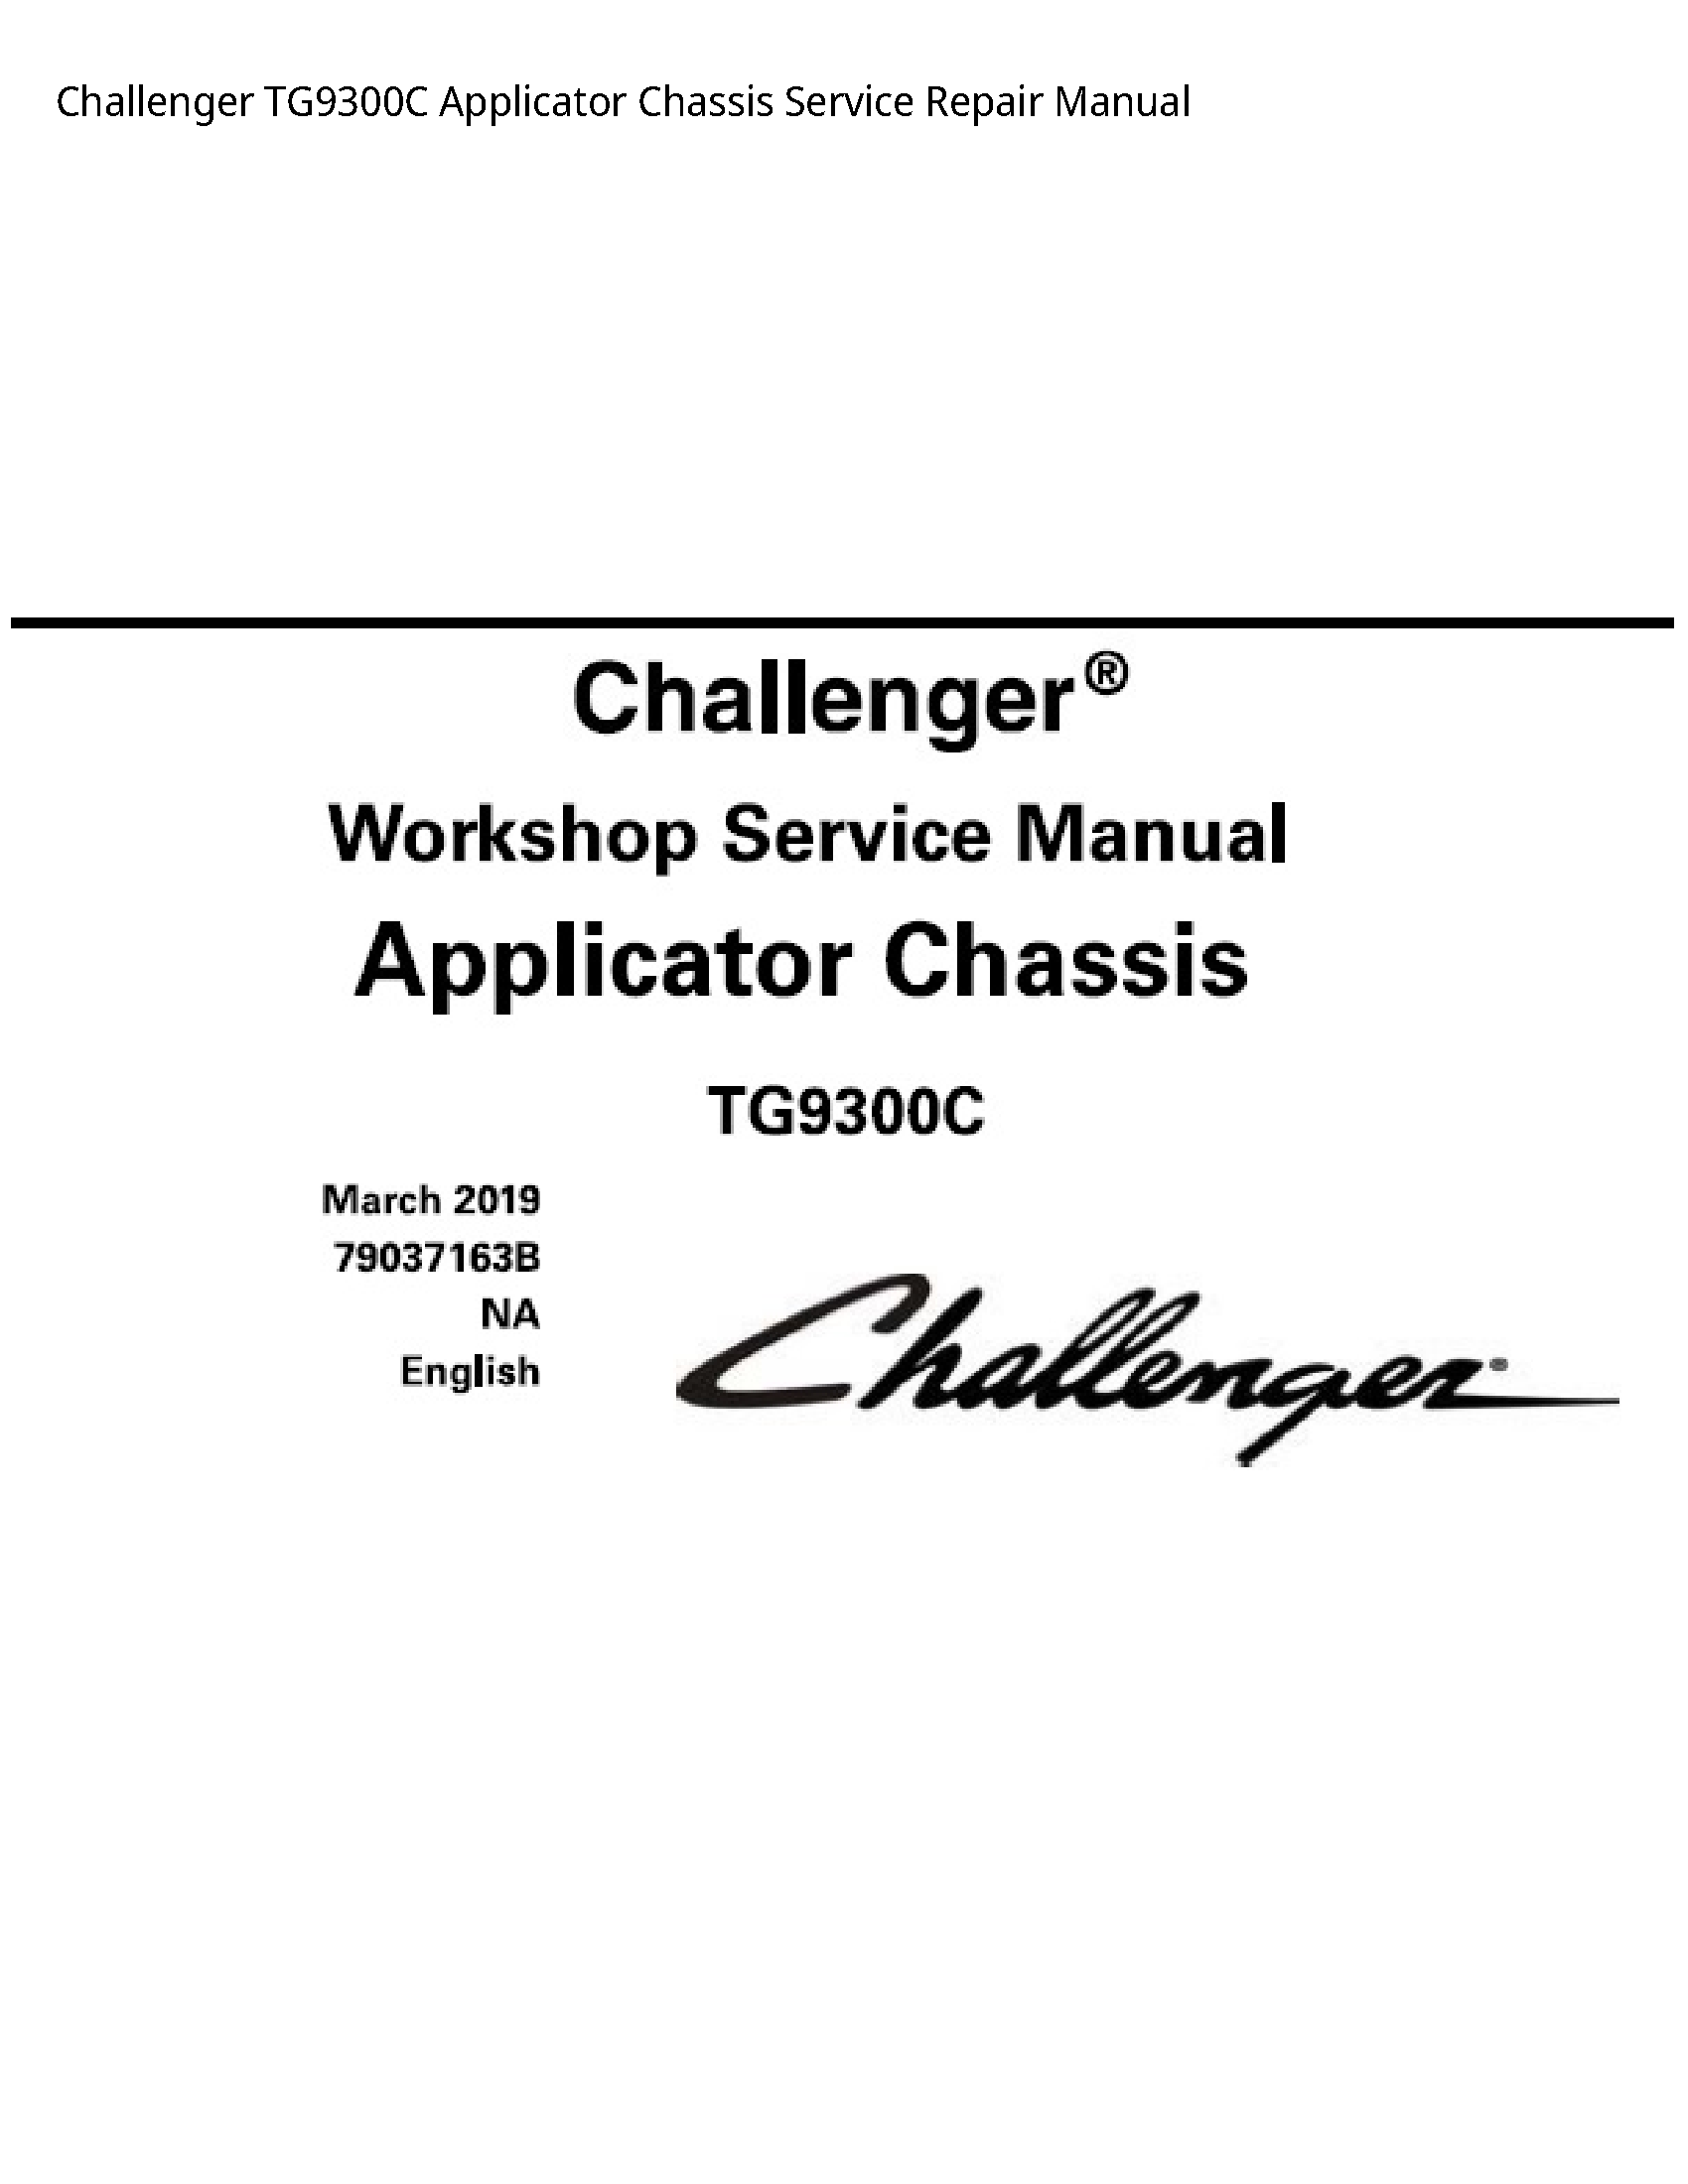 Challenger TG9300C Applicator Chassis manual